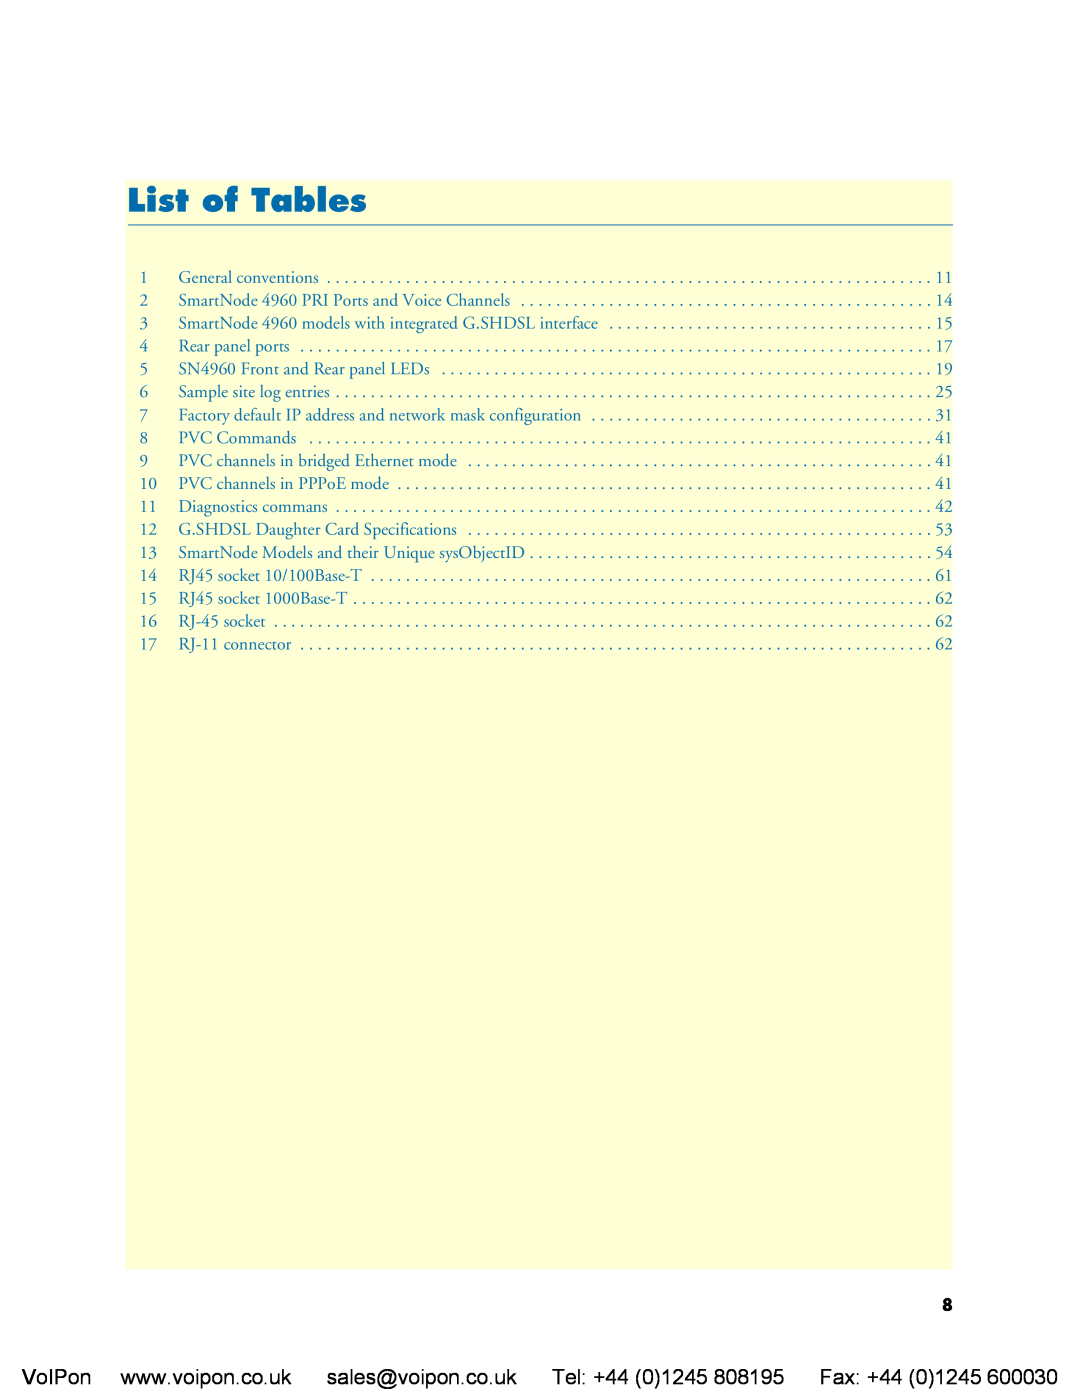 Patton electronic 4960 manual List of Tables 